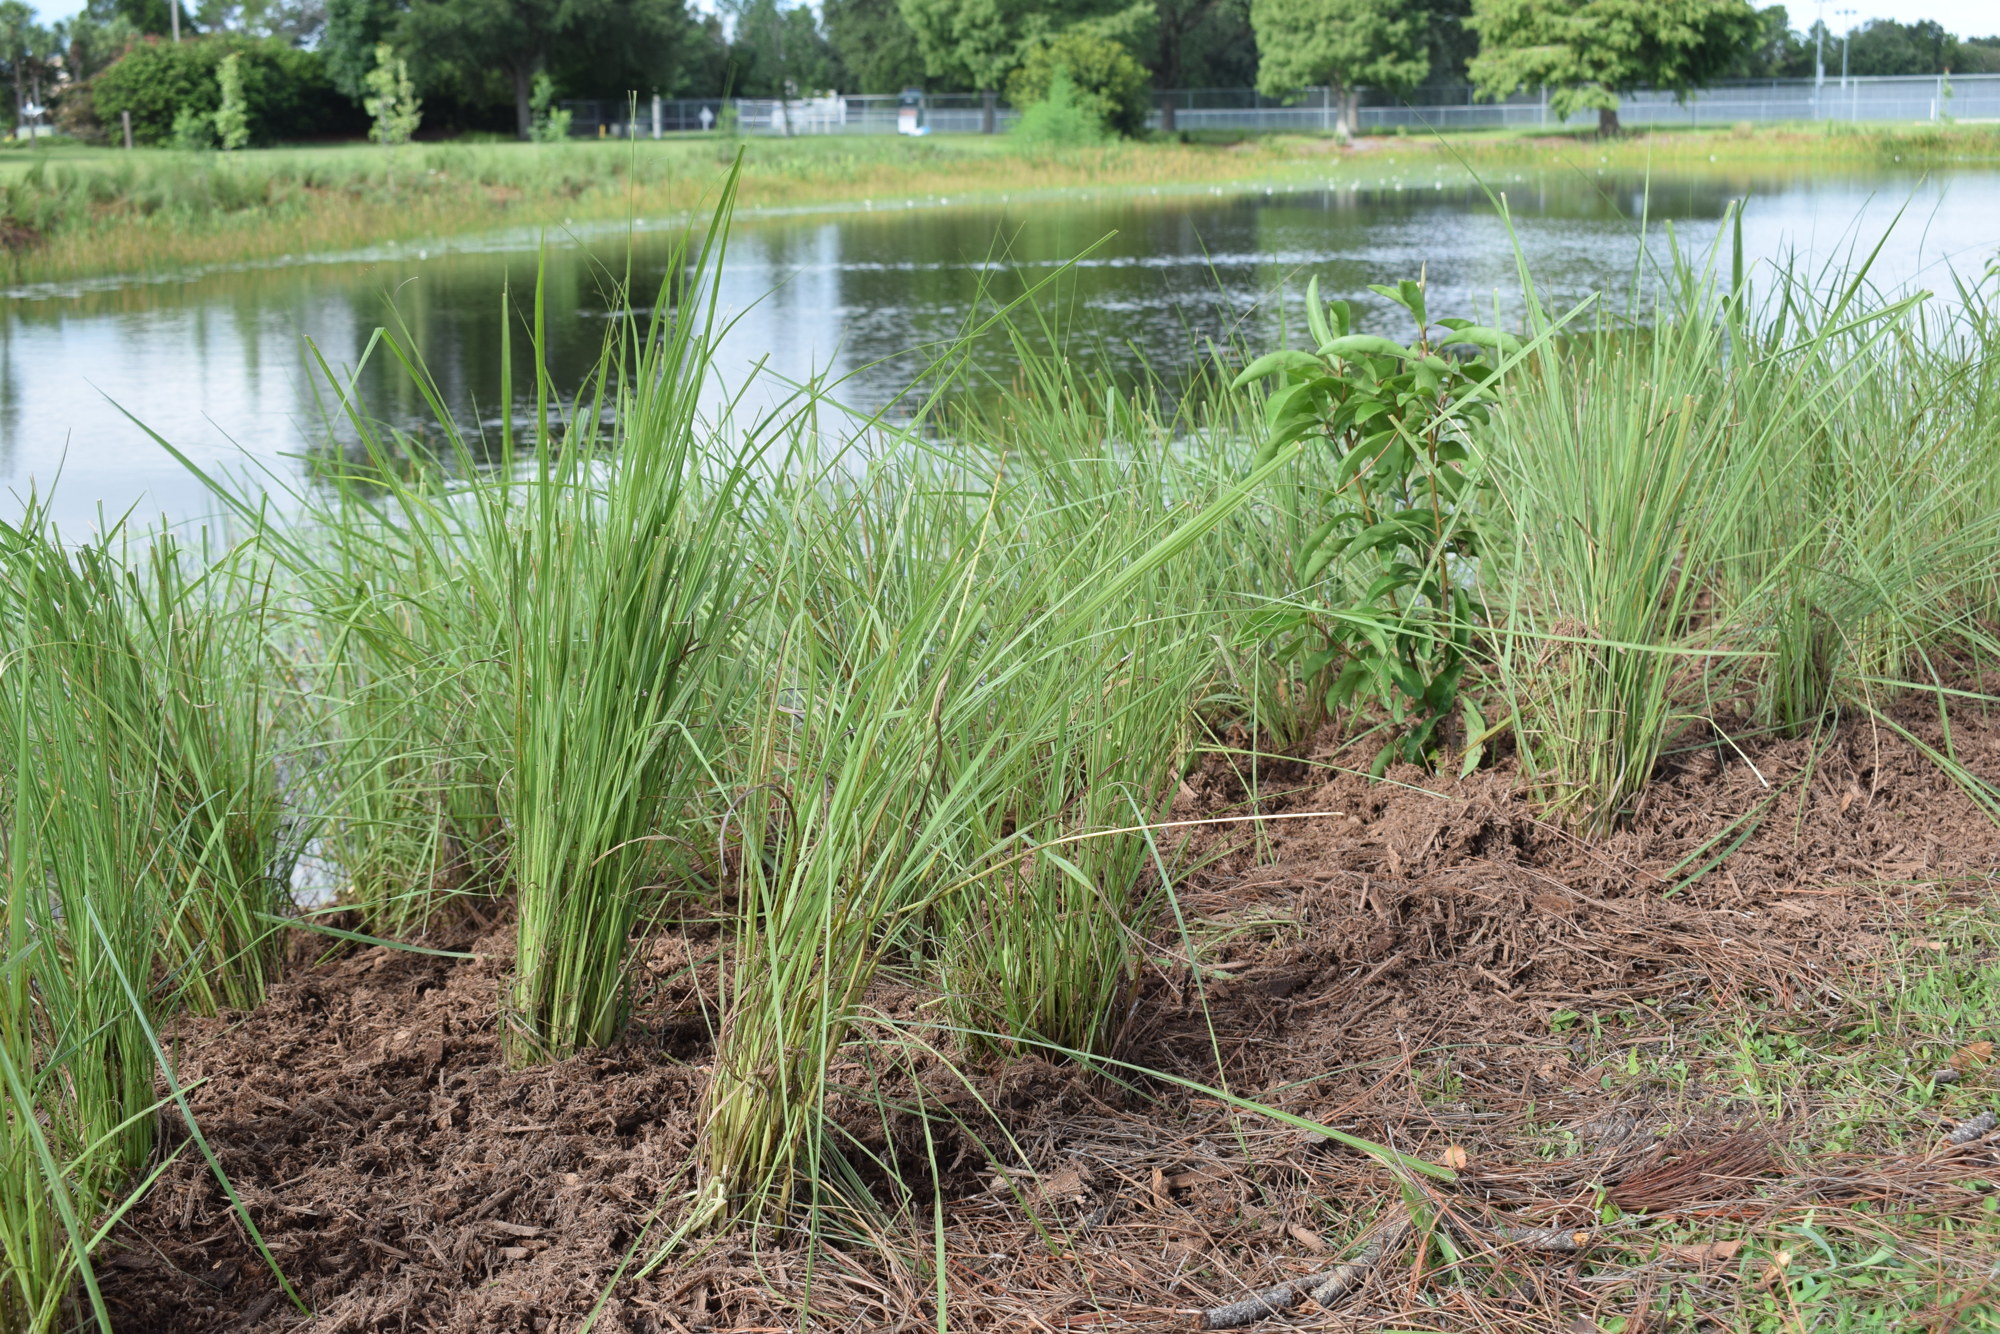 These plants along the outside of a stormwater pond at Greenbrook Park will be studied for their filtering ability.